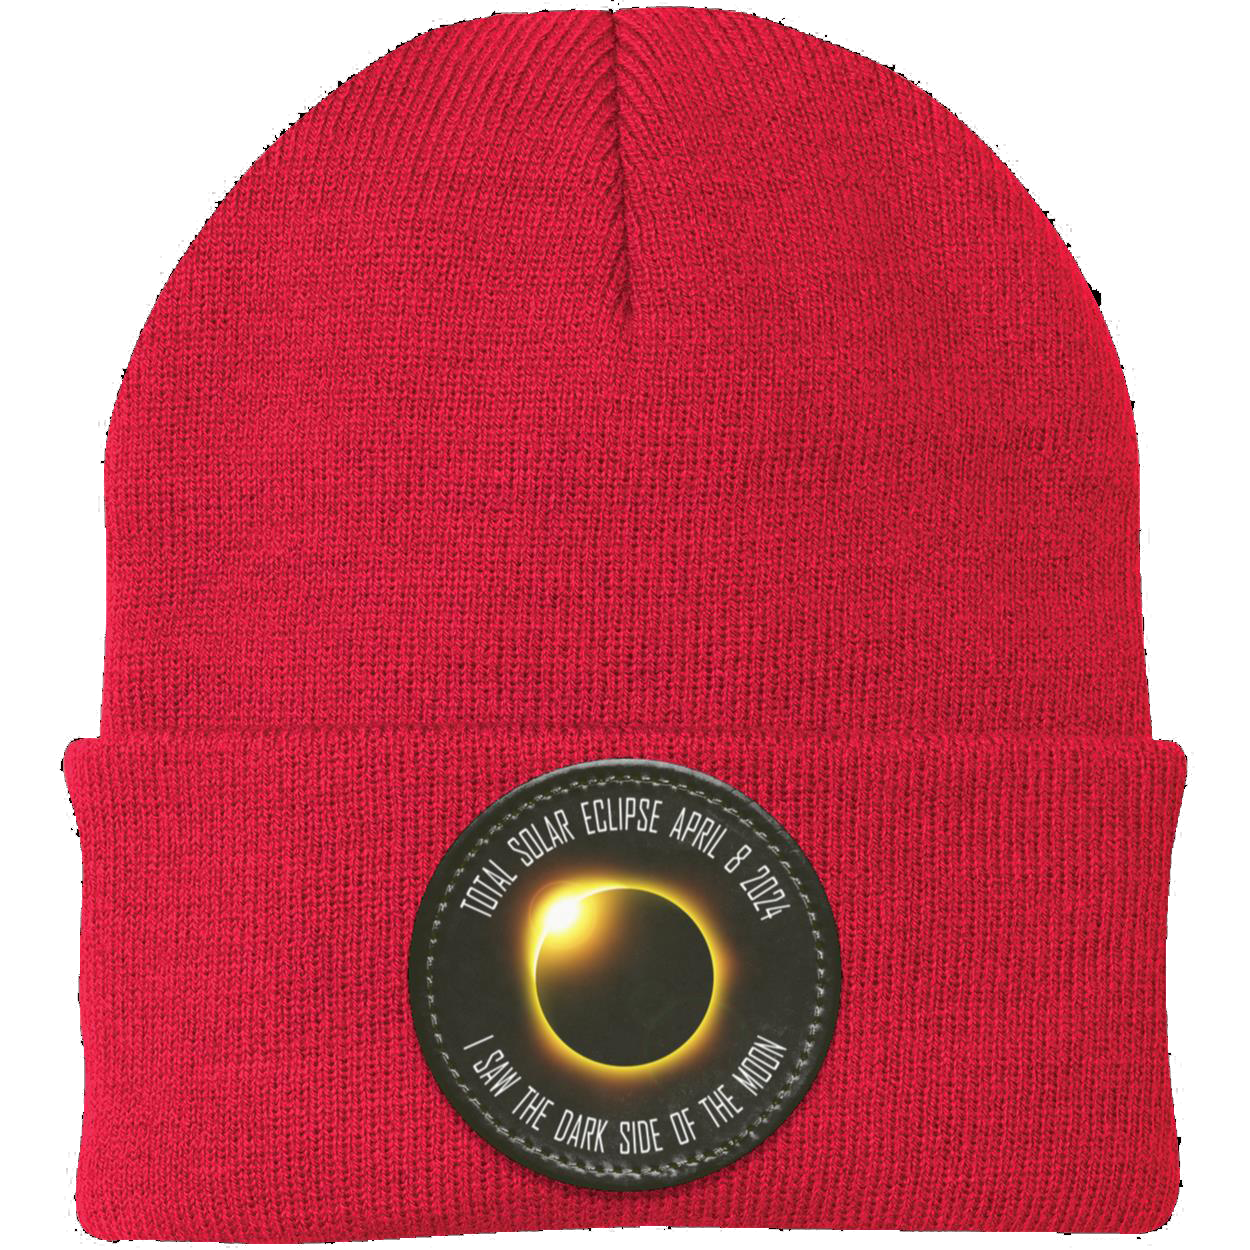 Total Solar Eclipse April 8 2024 eclipse beanie, I Saw the Dark Side of the Moon hat, Knit Cap - Patch